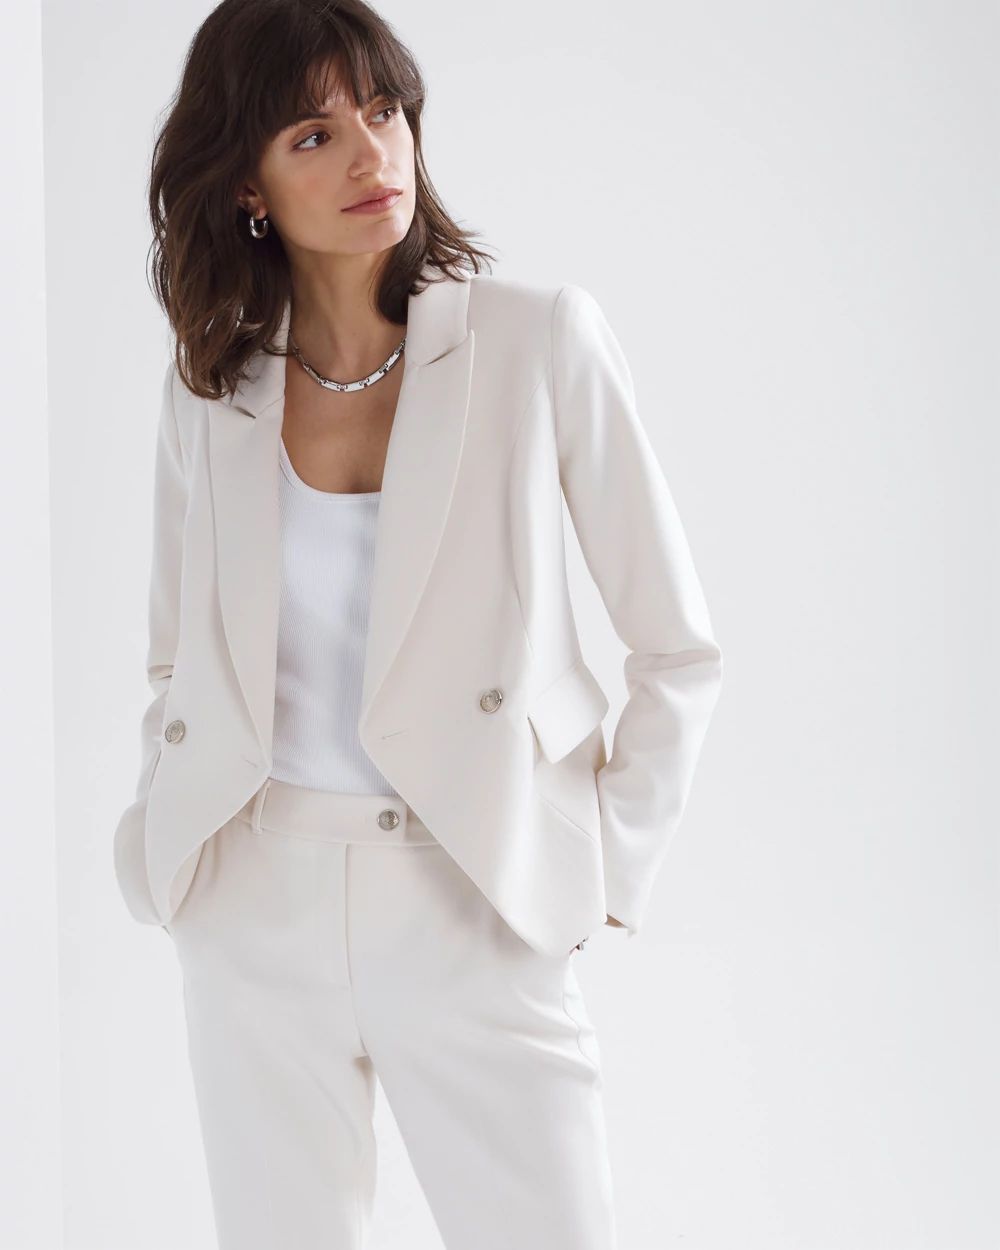 WHBM® Cropped Studio Blazer click to view larger image.